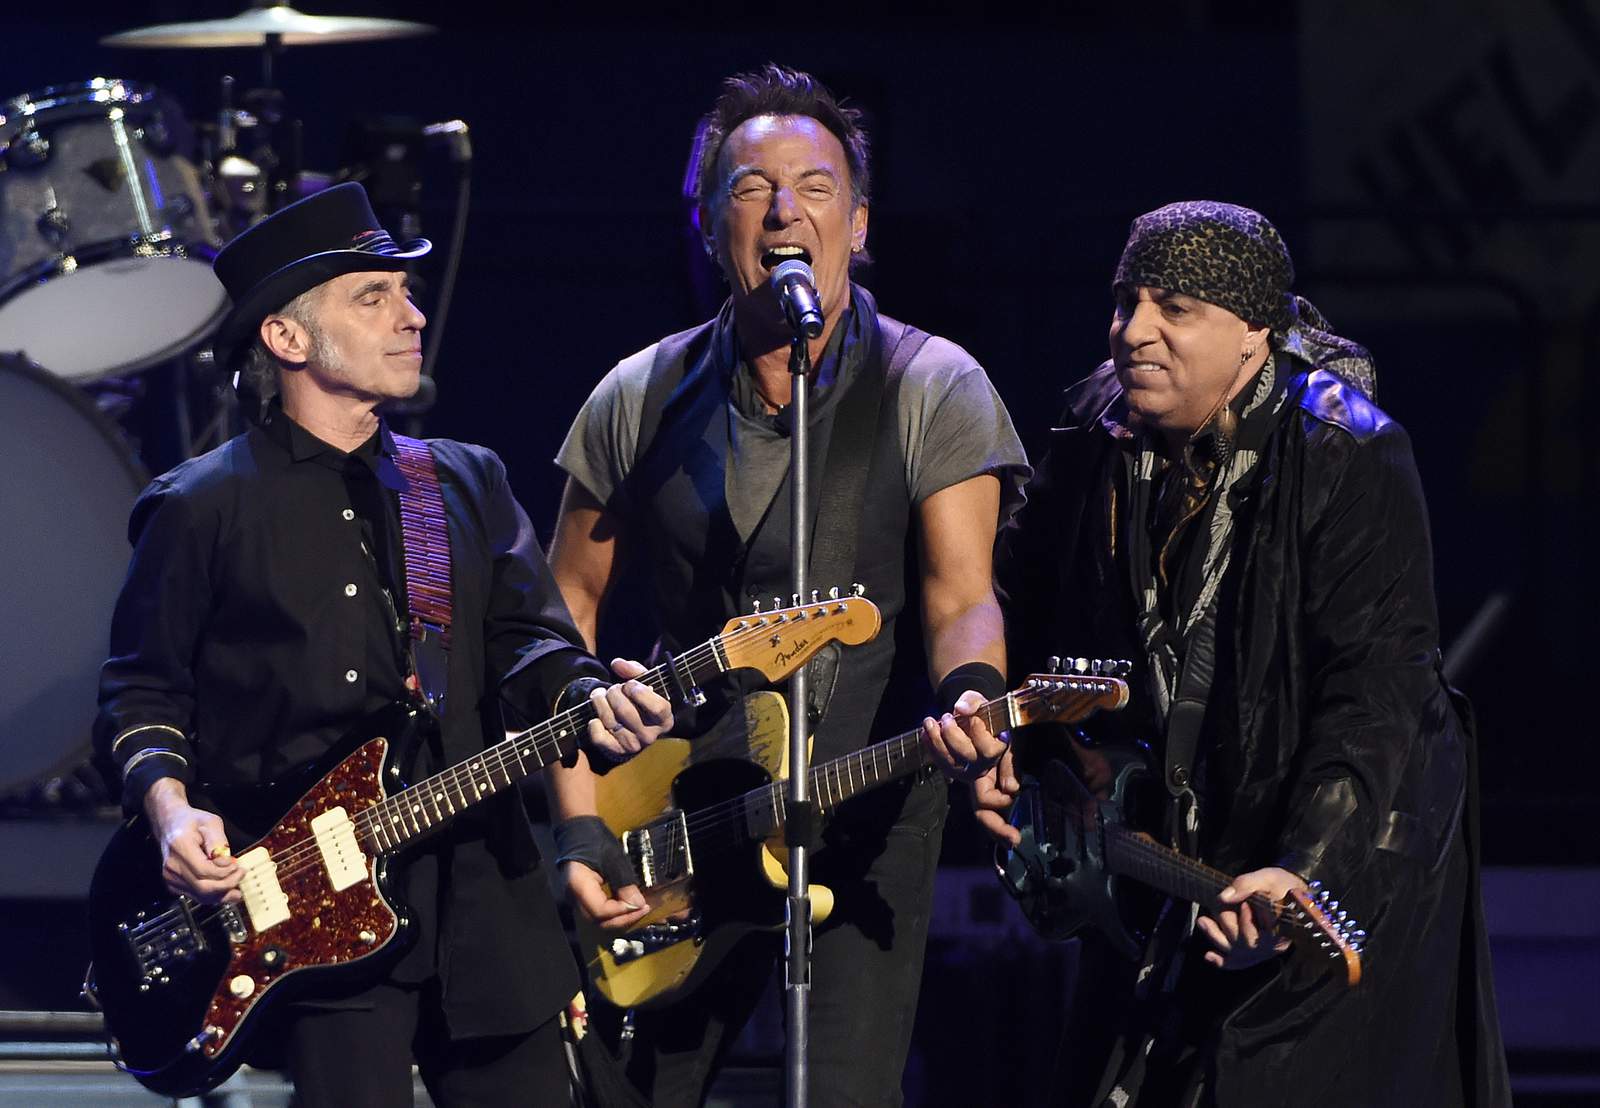 Bruce Springsteen and E Street Band plan new album in Oct.